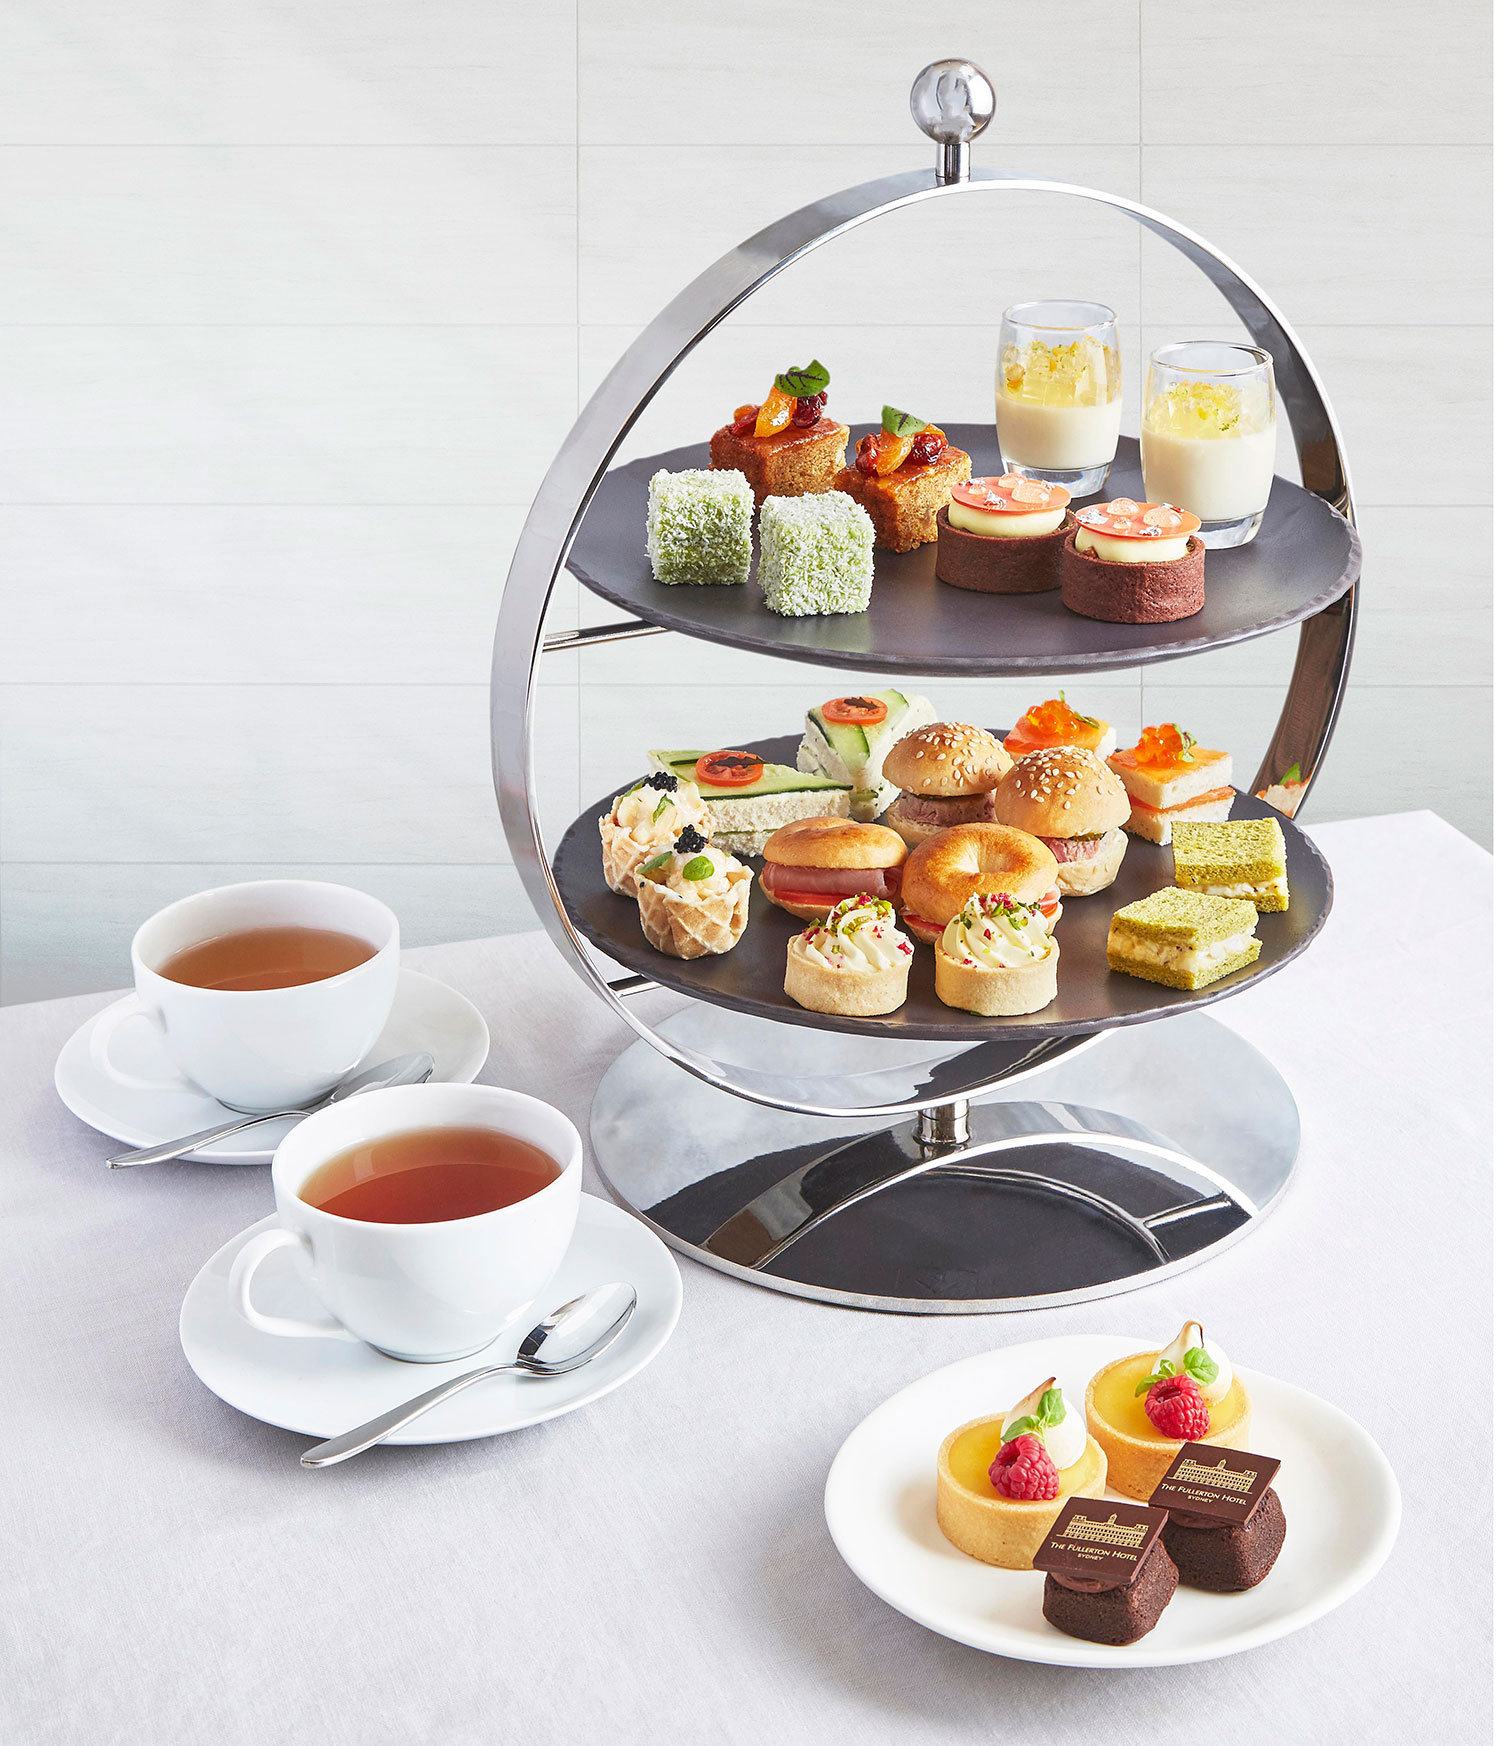 The two-tiered tower of delights - Afternoon Tea at the Fullerton, Sydney